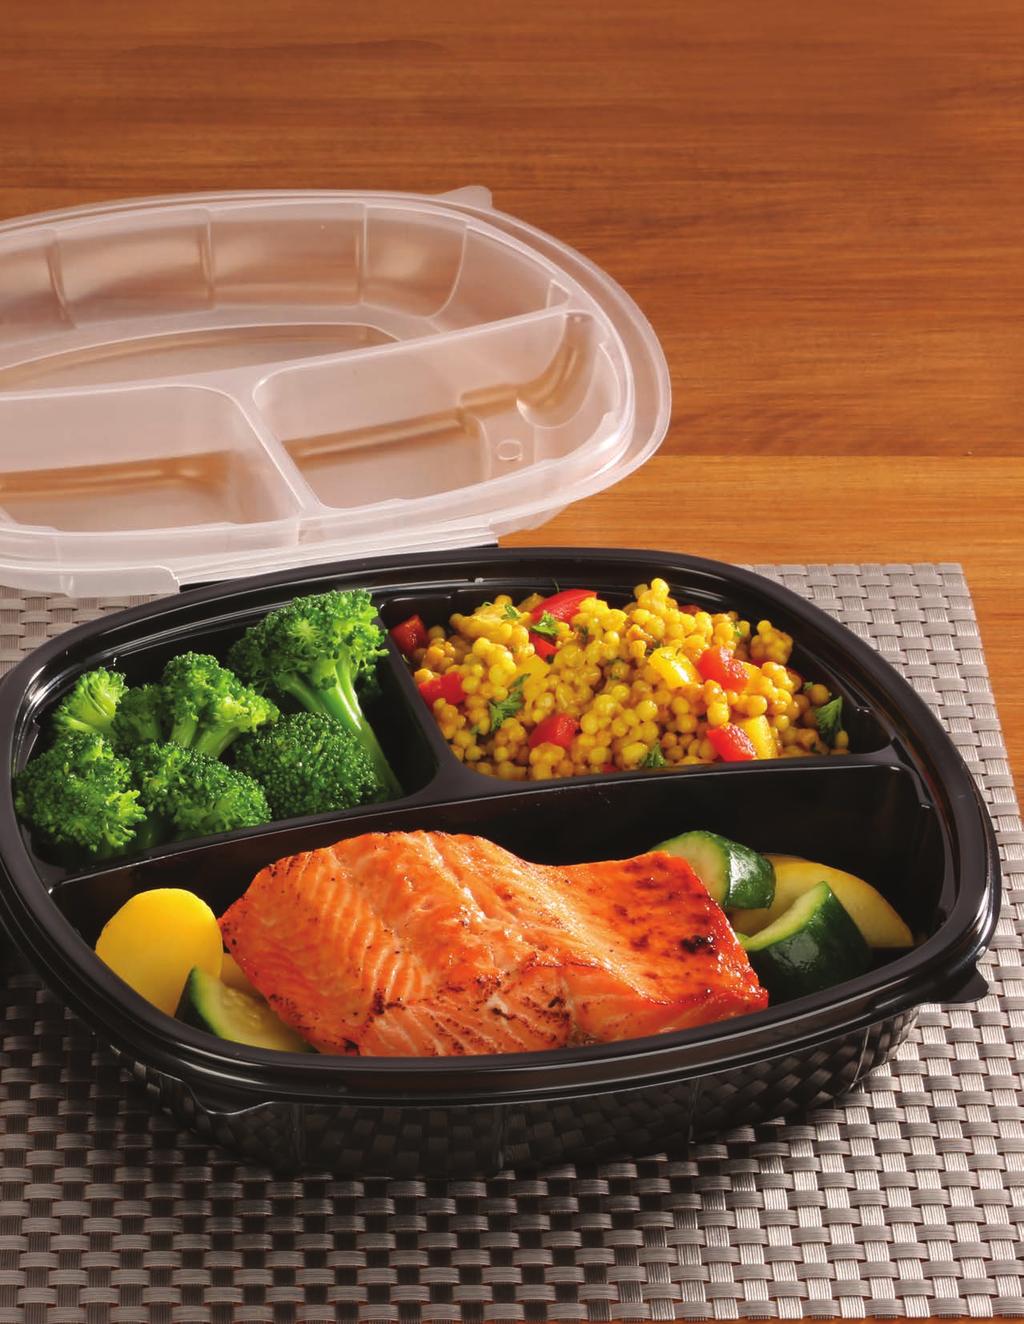 MICROWAVEABLE BREAK-AWAY FEATURE RECYCLABLE* * Where facilities exist. Some may not be available in your area. ITEM NUMBER 1000454 Base Lid 21.9 oz. 6.00 x 6.